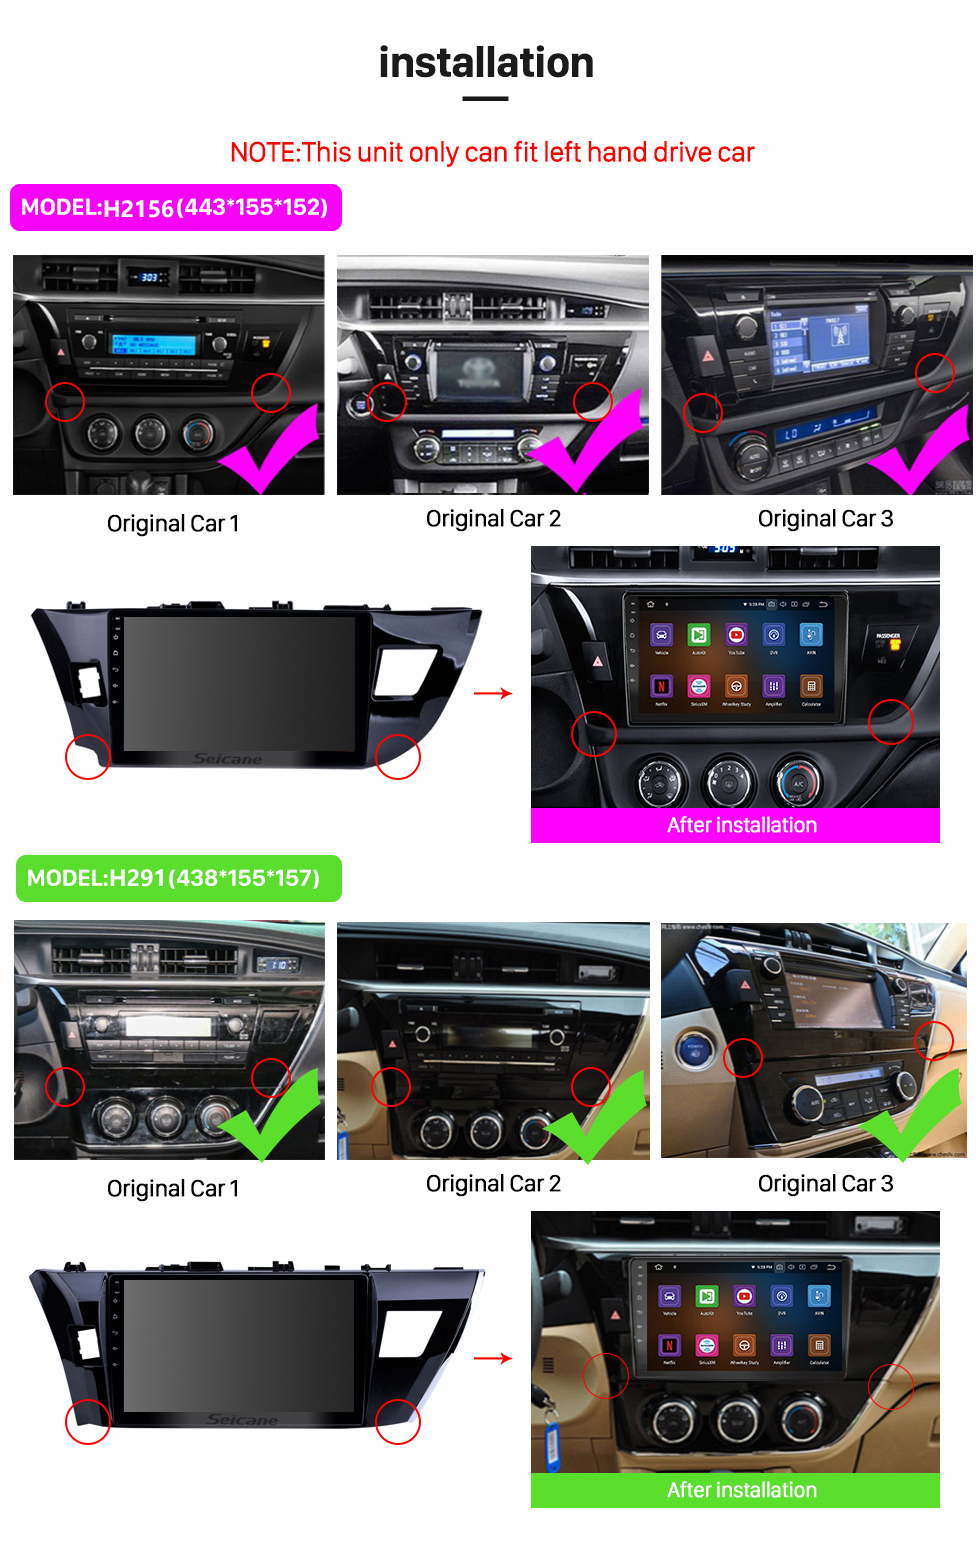 Seicane OEM 10.1 inch Android 12.0 HD Touchscreen Bluetooth Radio for 2014 Toyota Levin with GPS Navigation USB FM auto stereo Wifi AUX support DVR TPMS Backup Camera OBD2 SWC